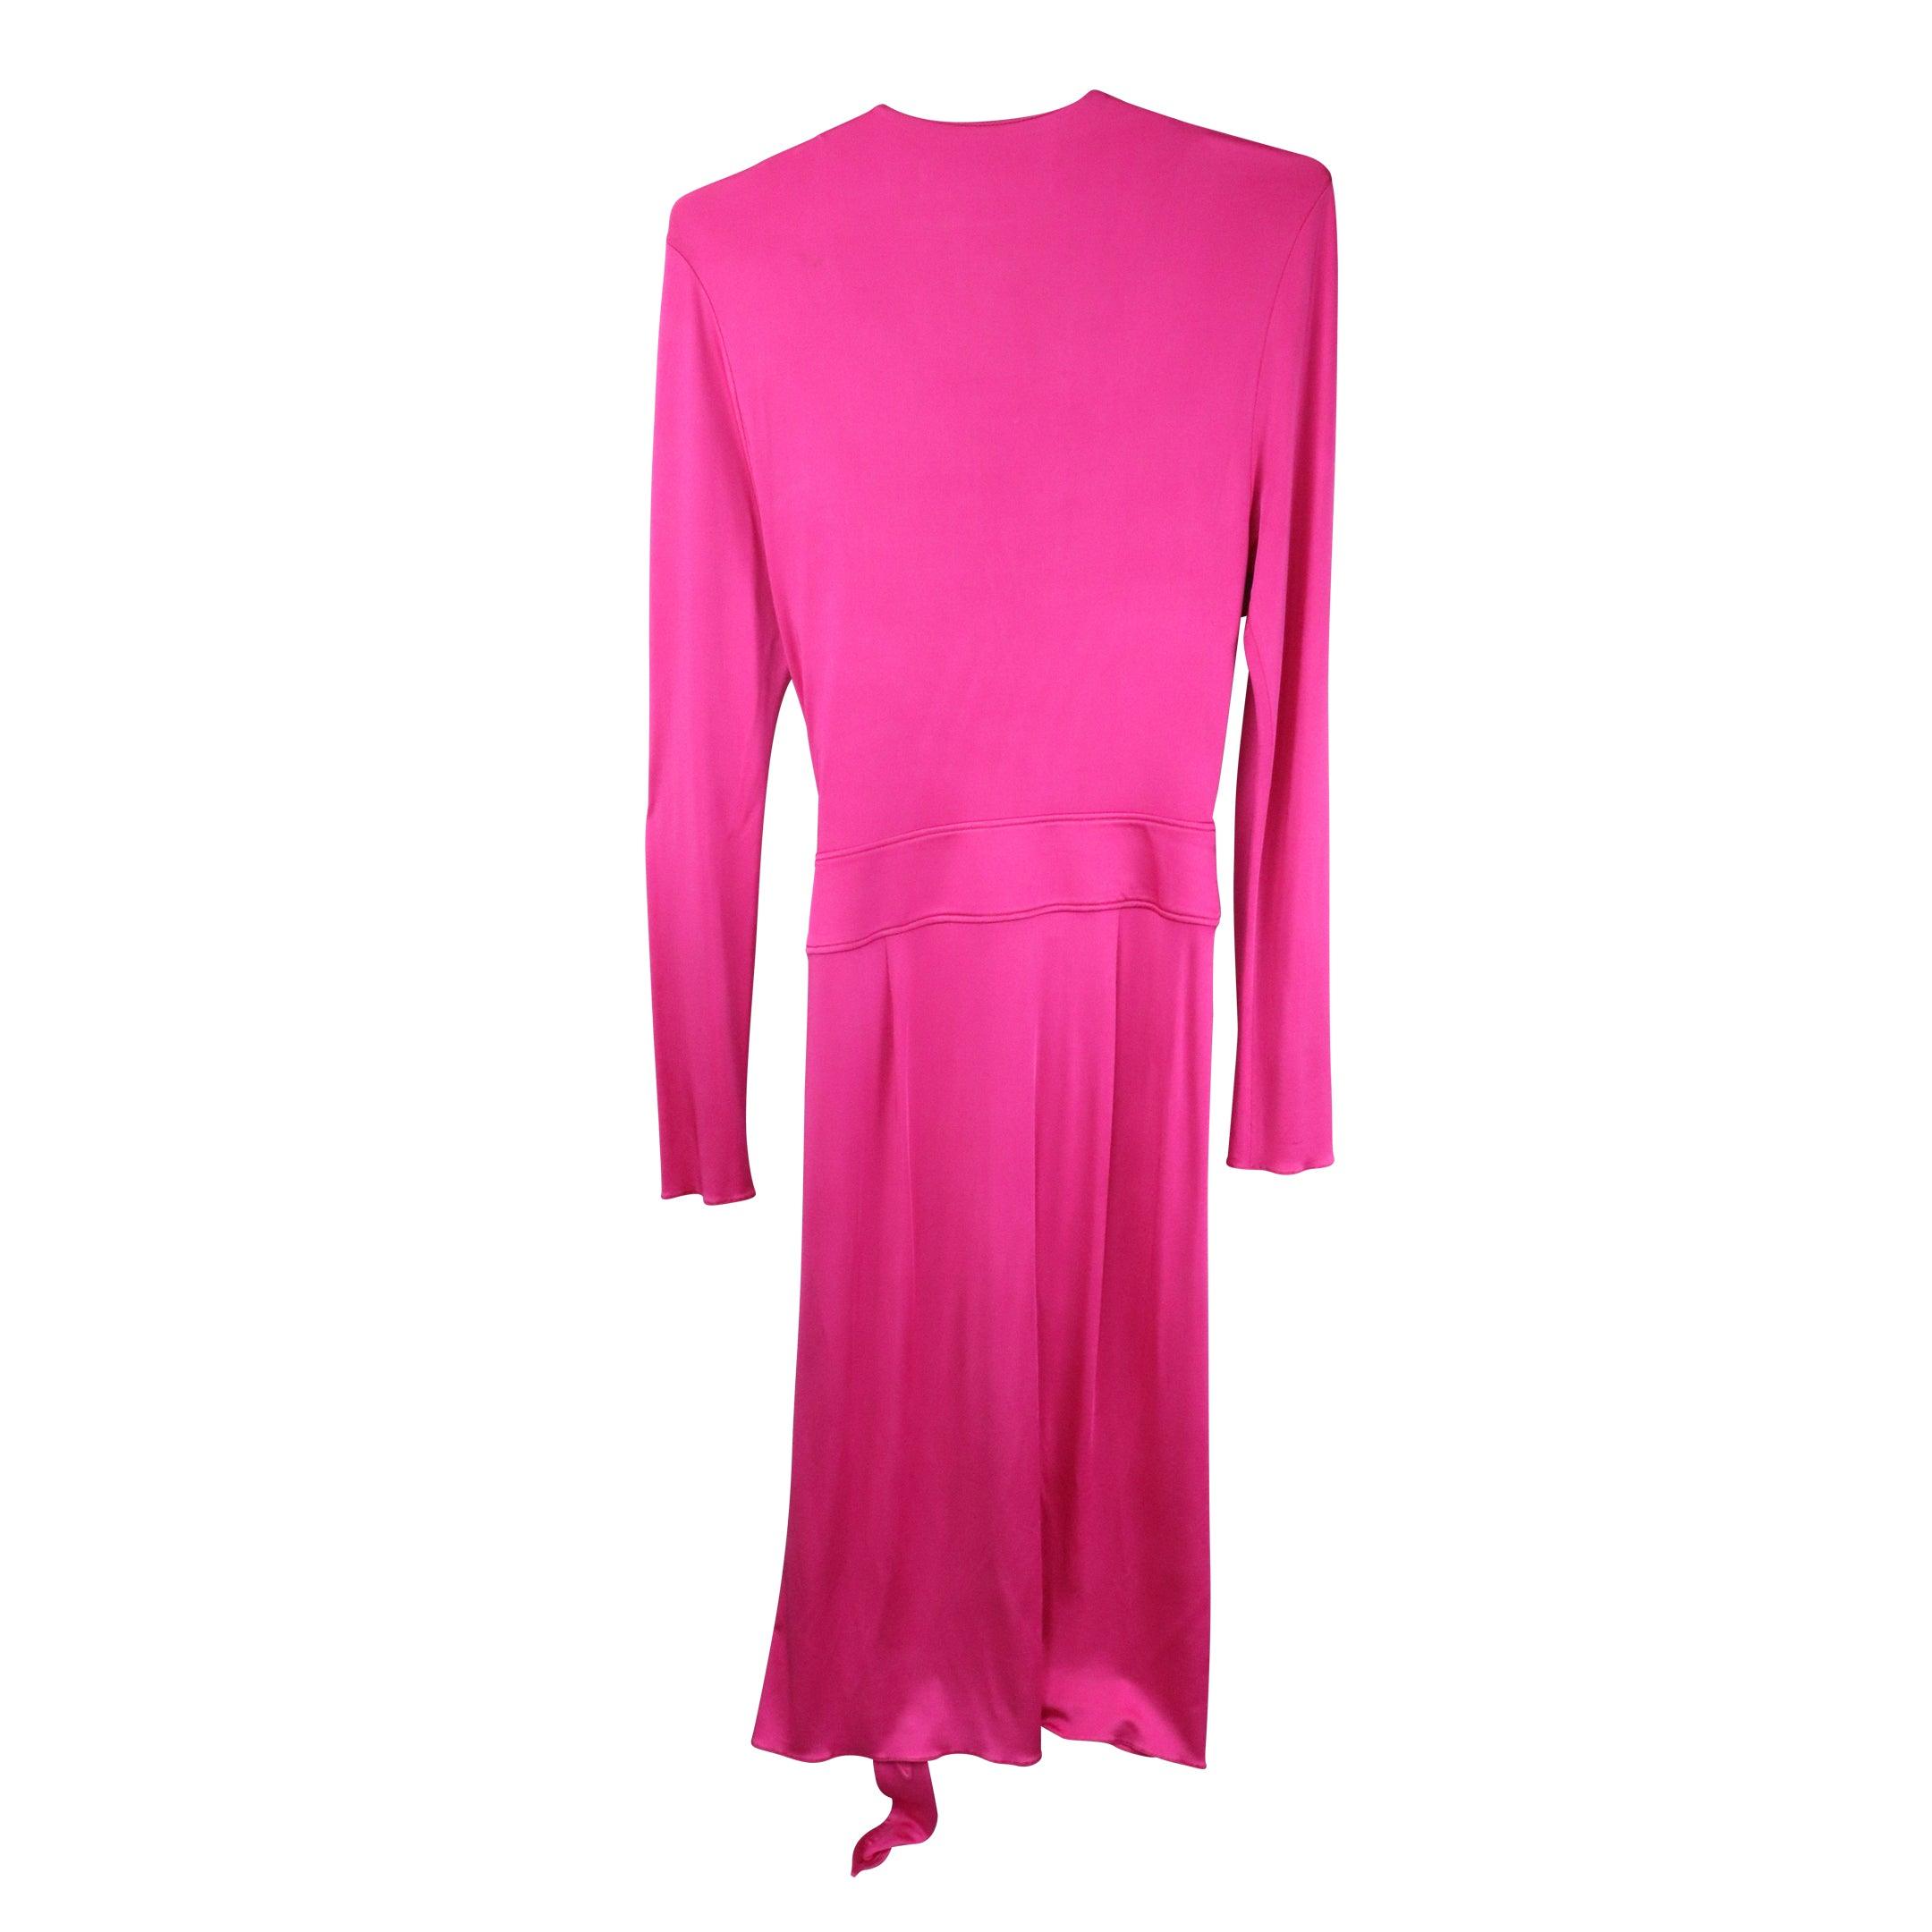 Alexandre Vauthier Dress - Women's 40 - Fashionably Yours